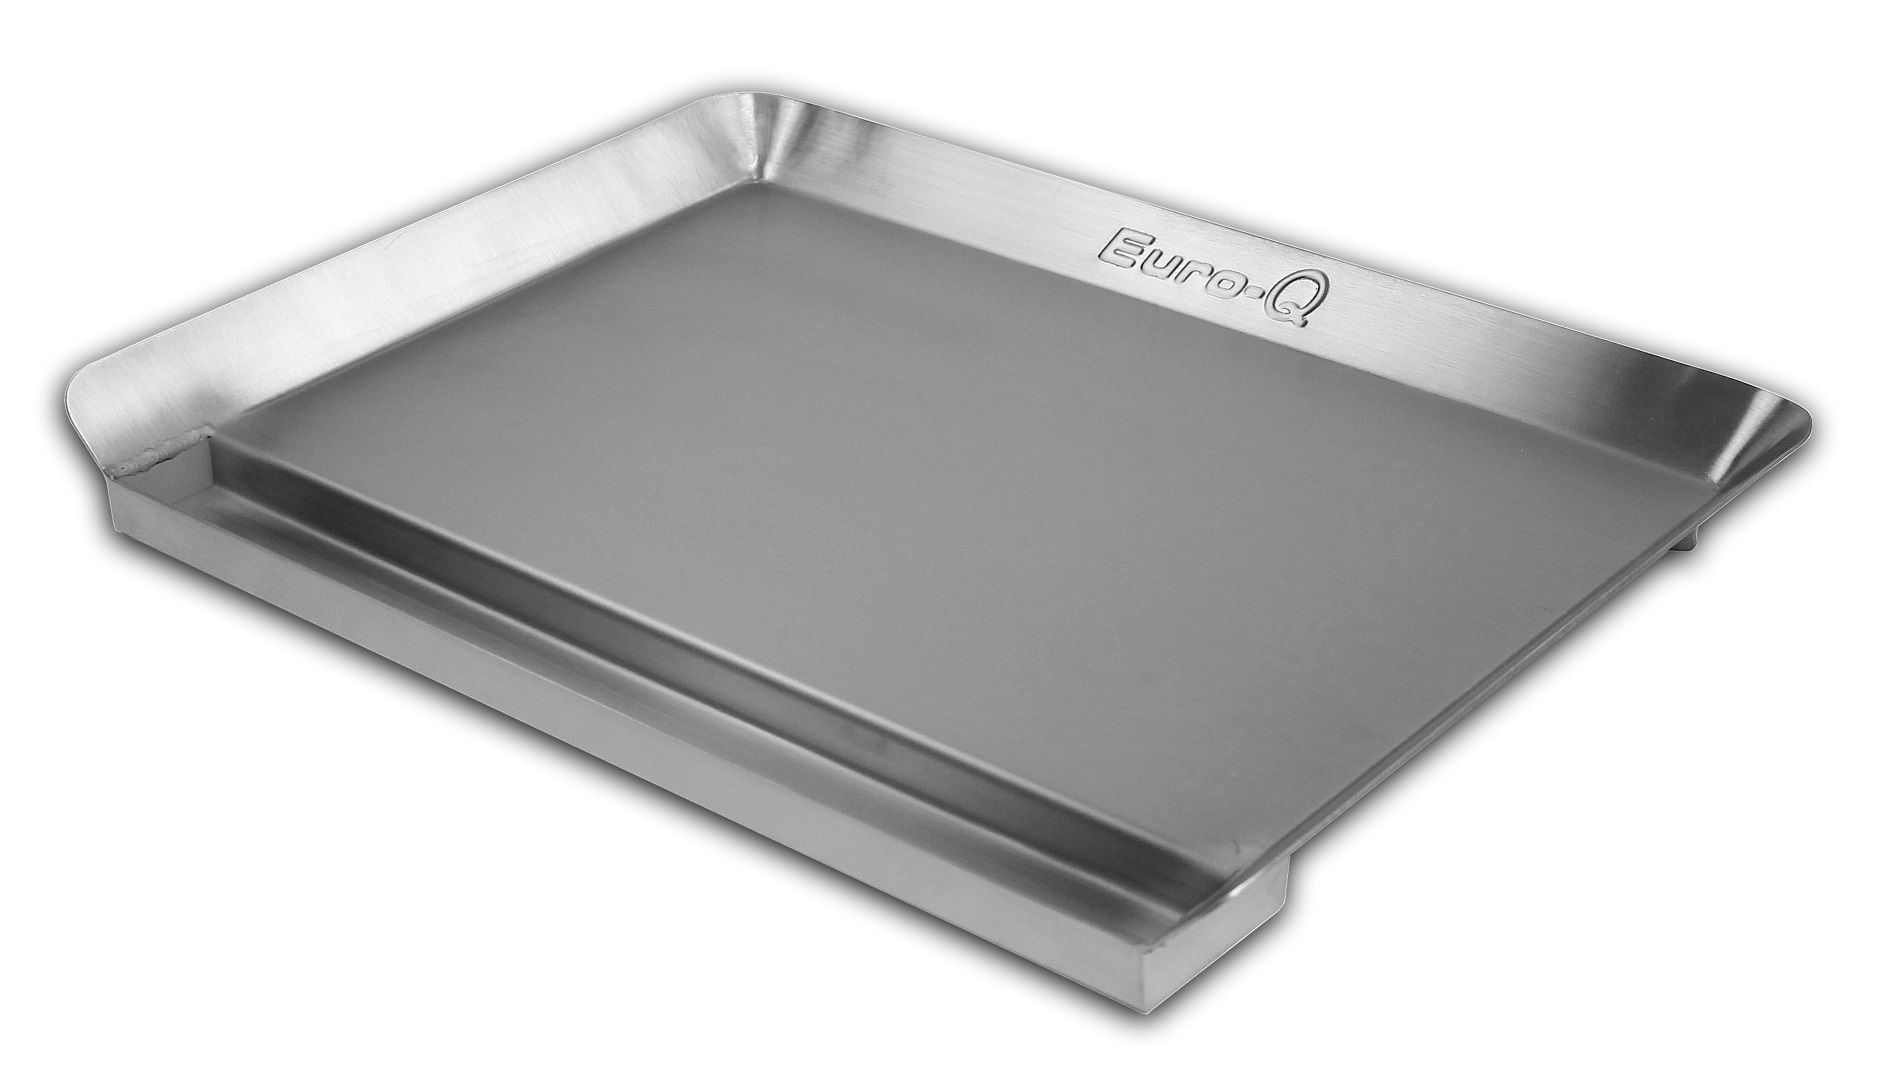 Little Griddle Essential Series Euro-Q .- Full-Size, Low Profile Stainless Steel Griddle